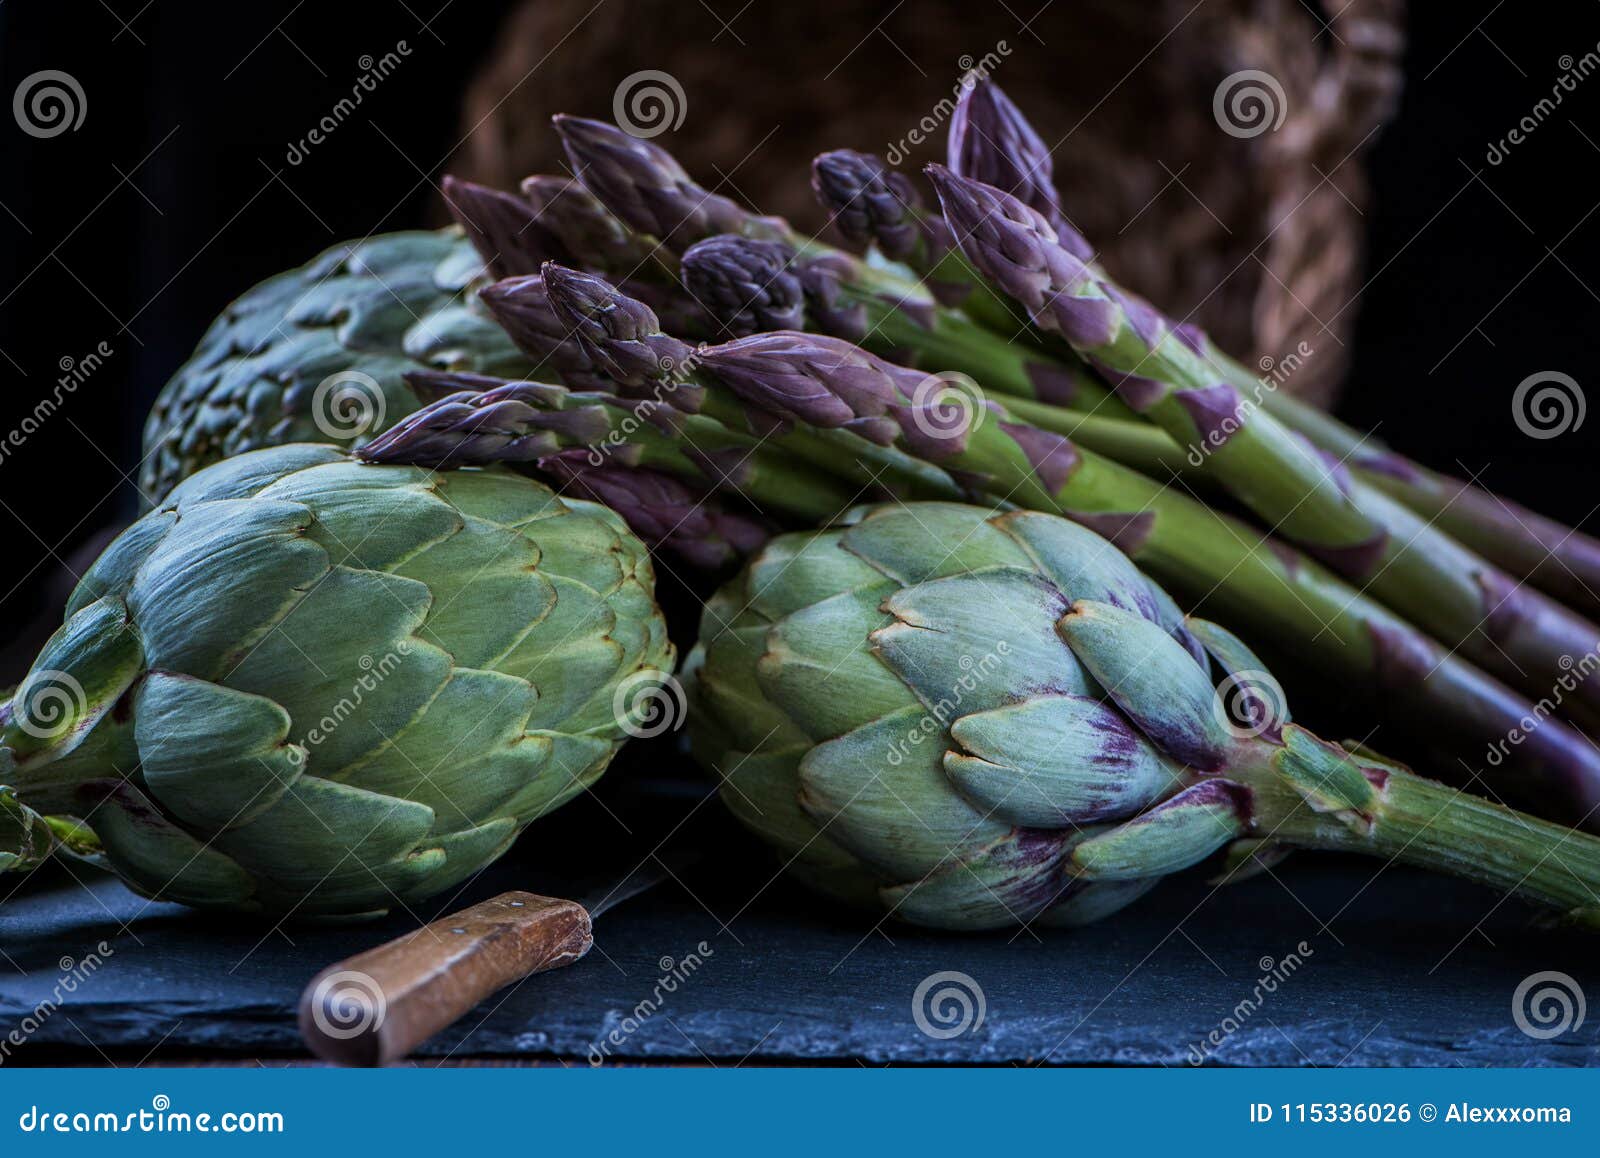 a still life of artichokes with knife and asparagus on the rustic textured background close side view low key